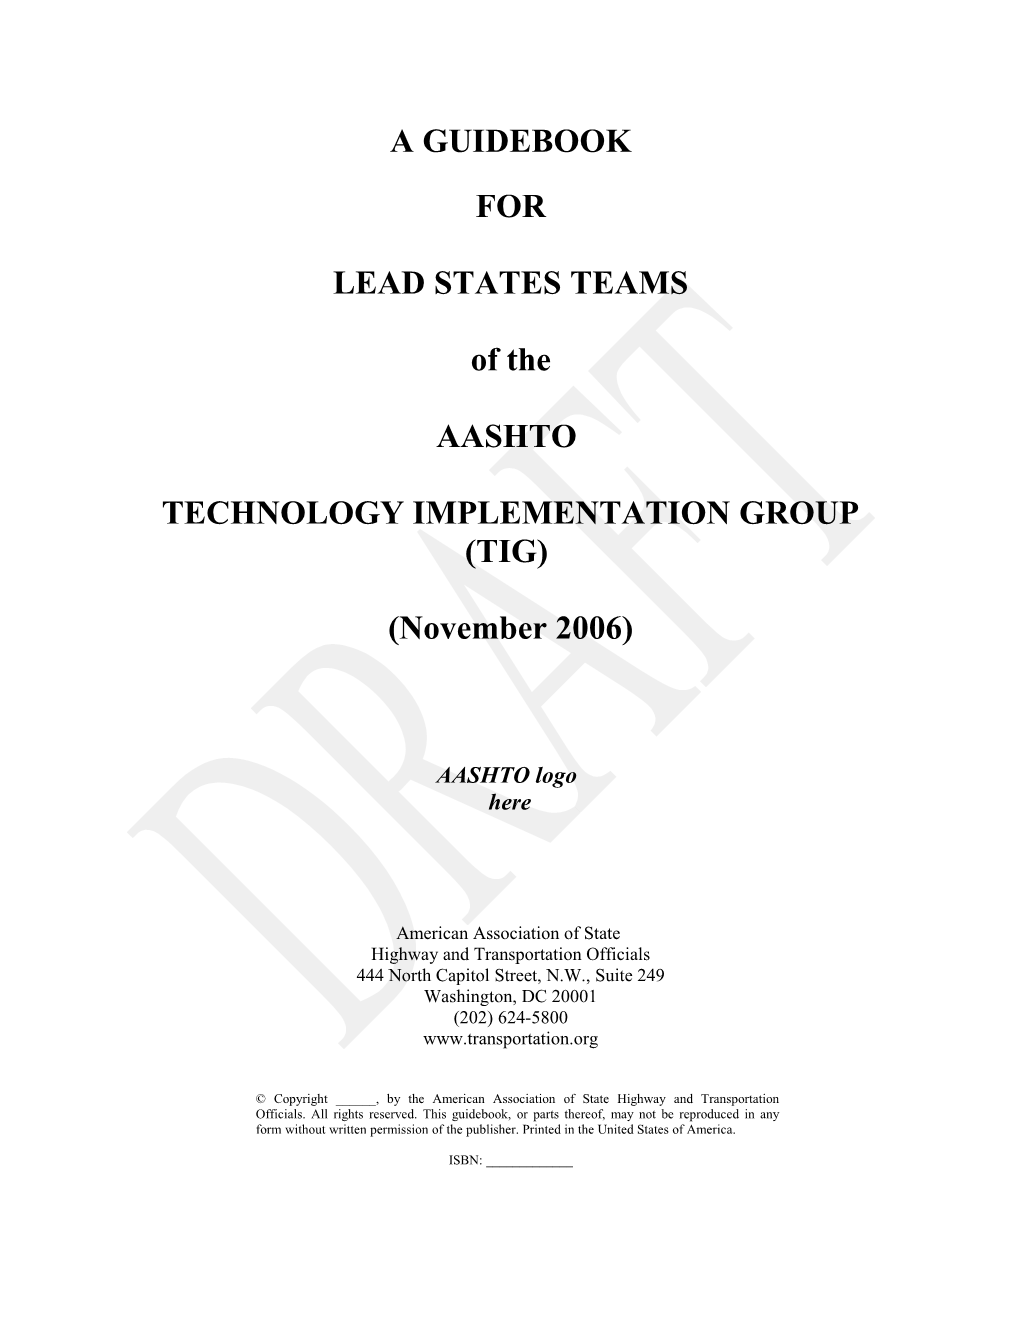 Guidebook for Lead States Team (Draft)